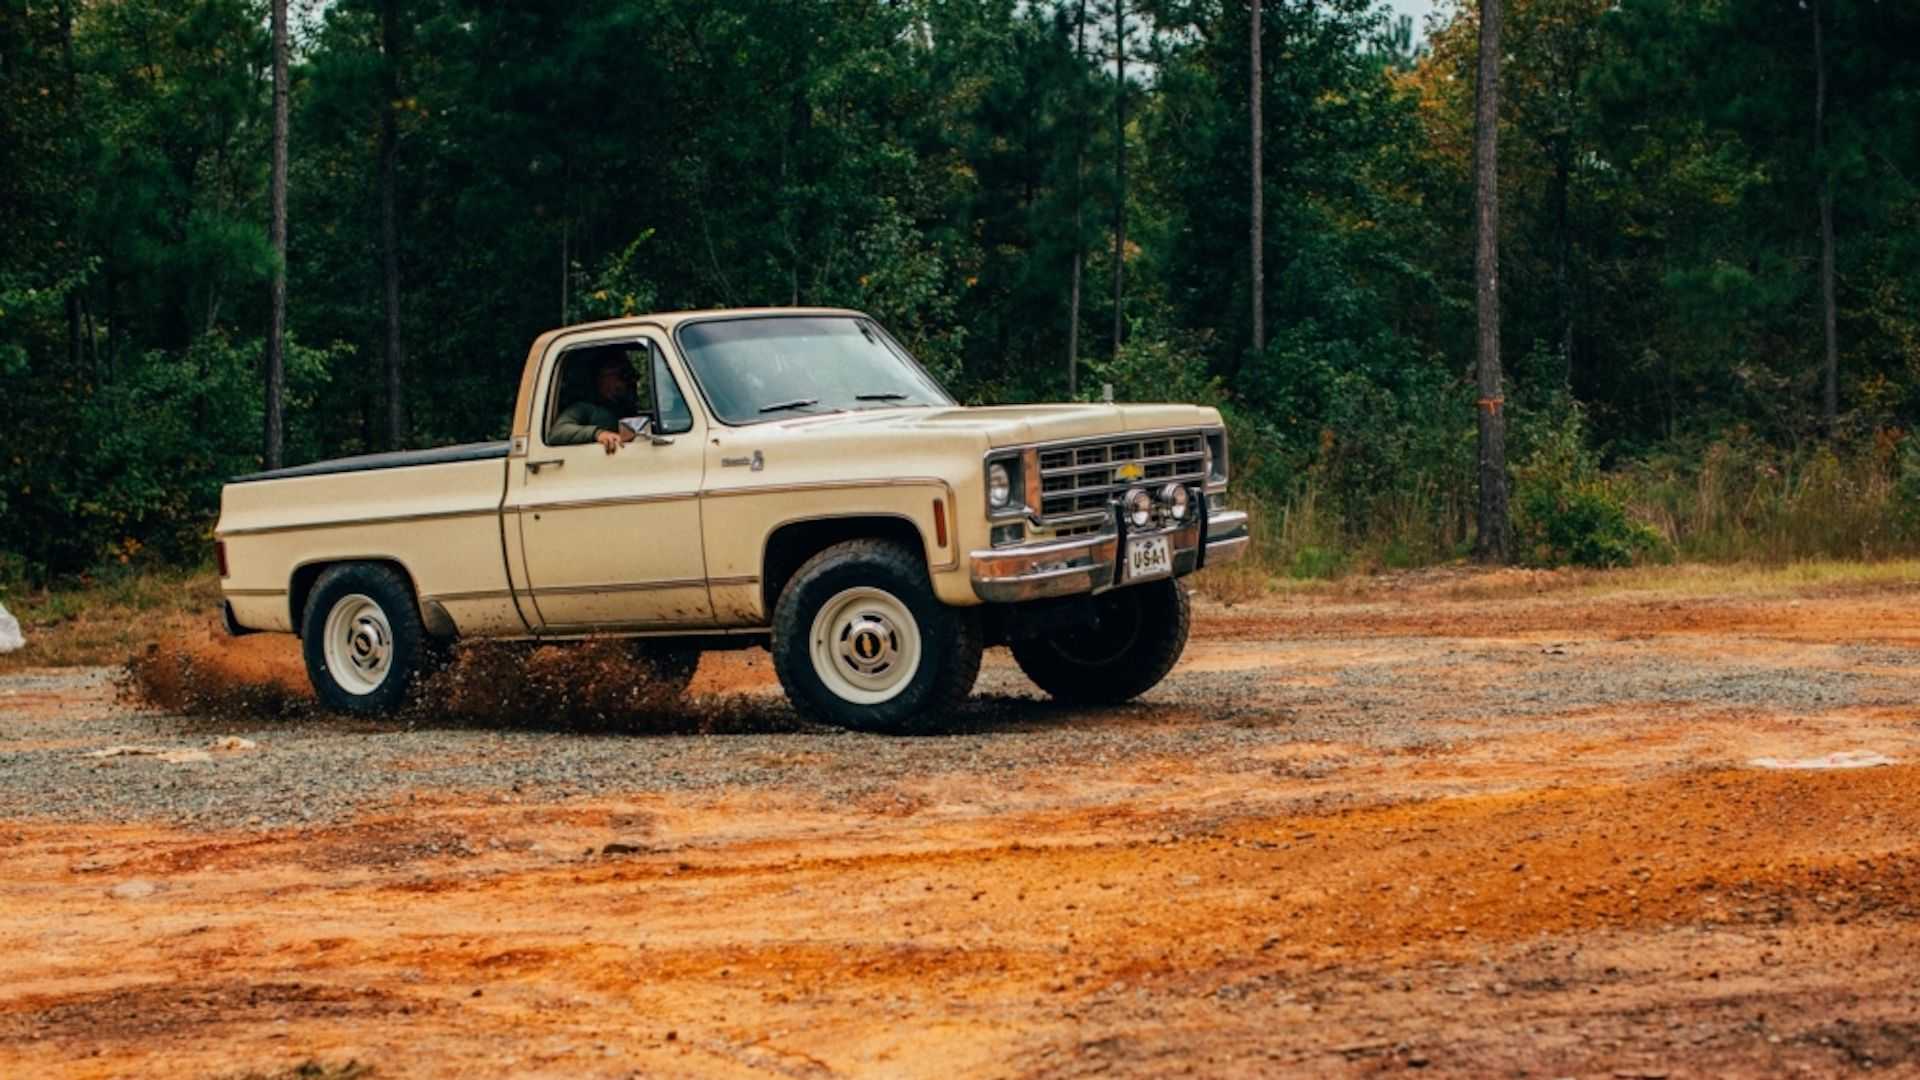 This 'New' Chevy Square Body Truck Takes Away The Pain Of Rebuilding One